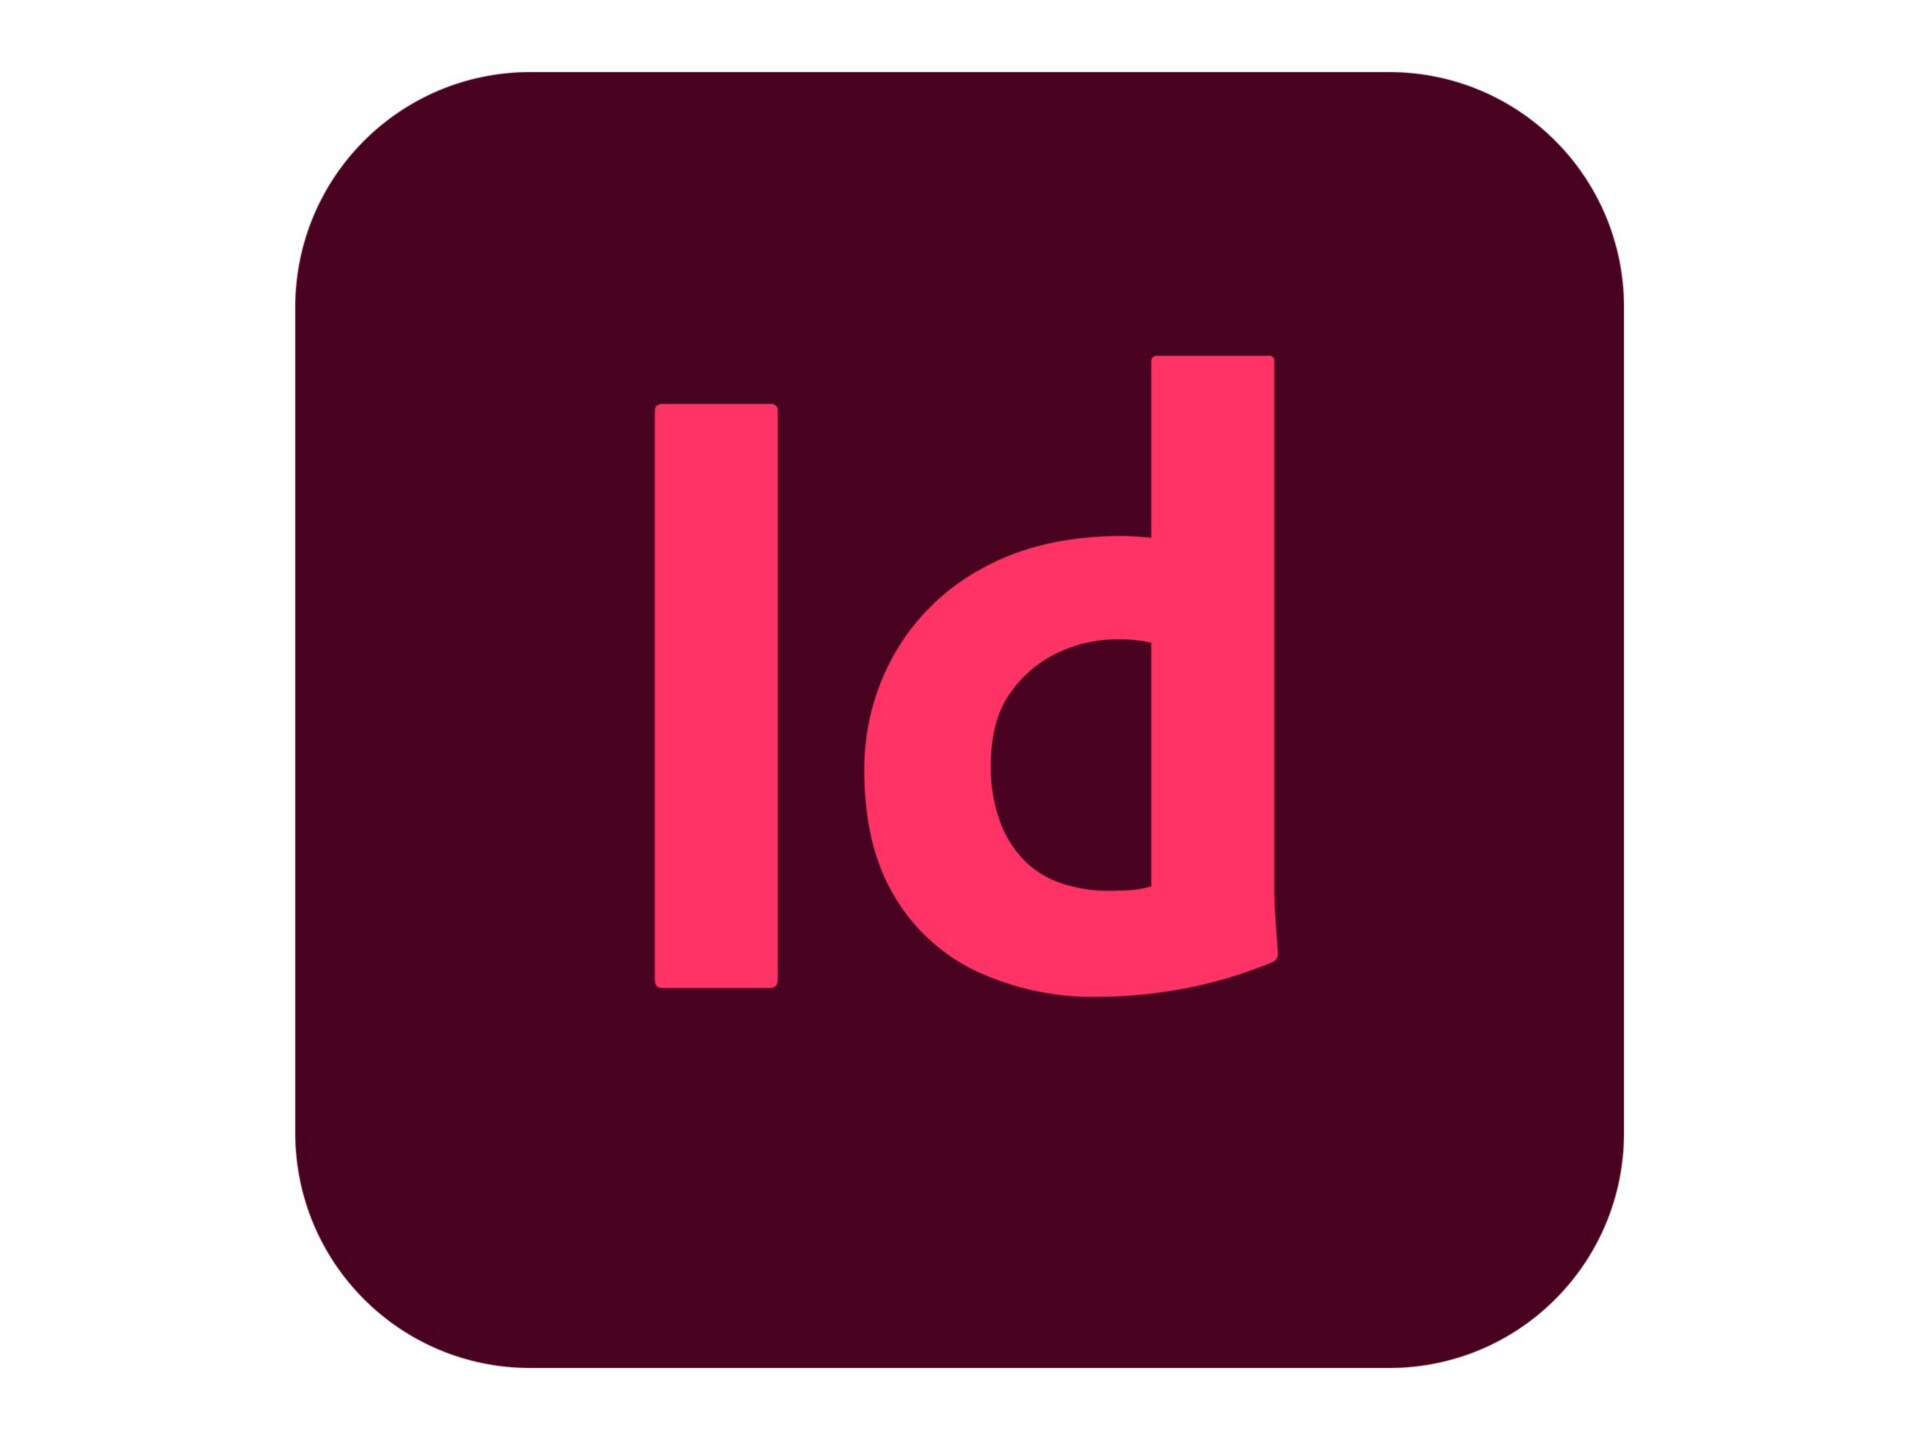 Adobe InDesign CC for teams - Subscription New (30 months) - 1 named user